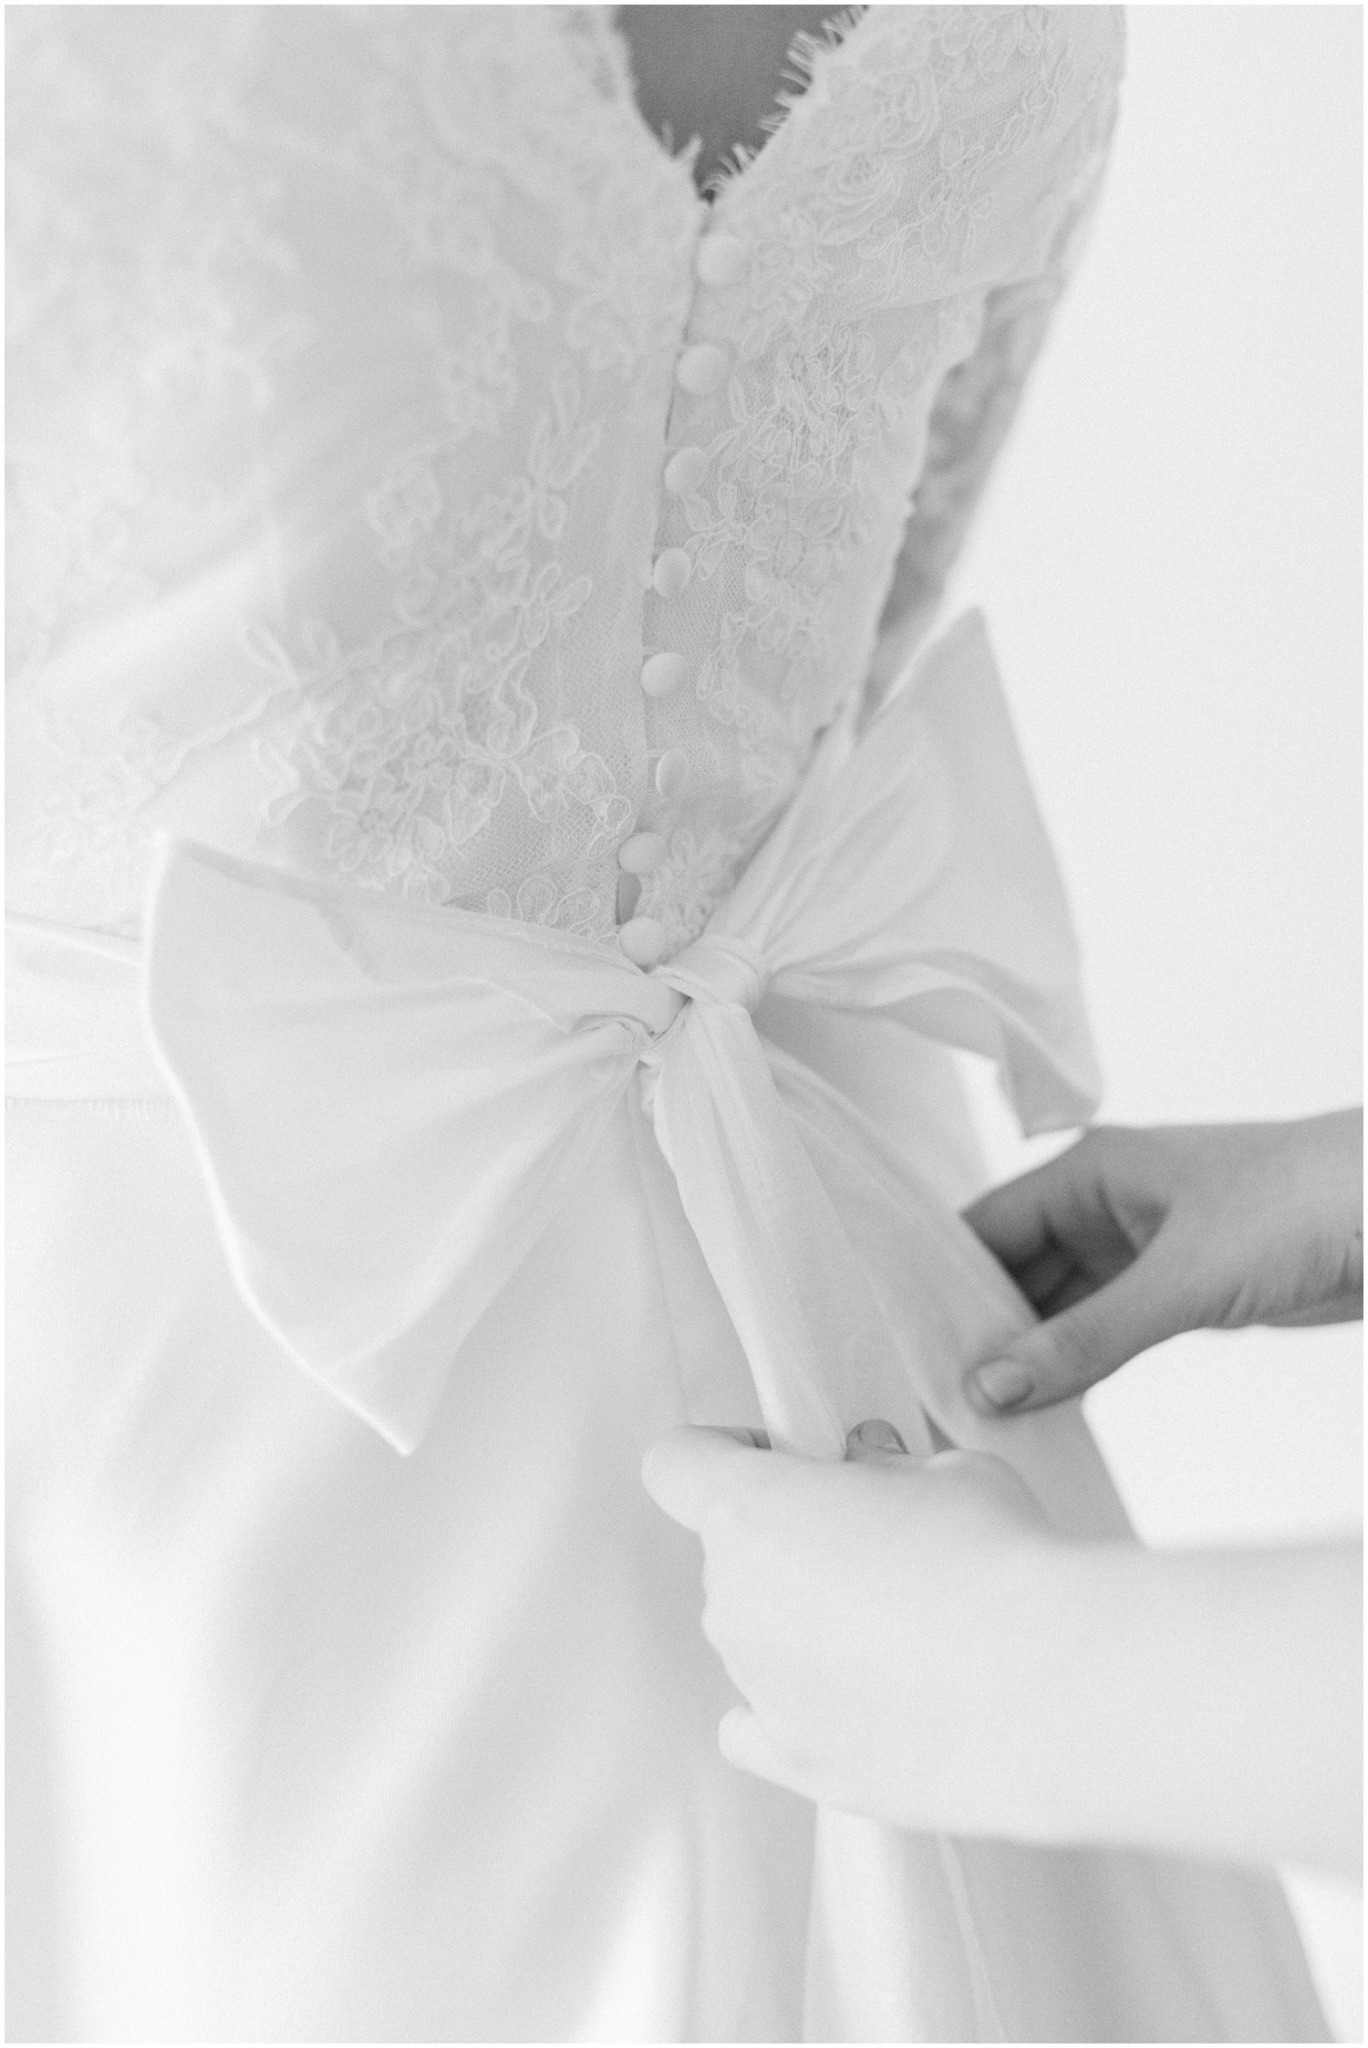 lace and bow details of bride's wedding gown